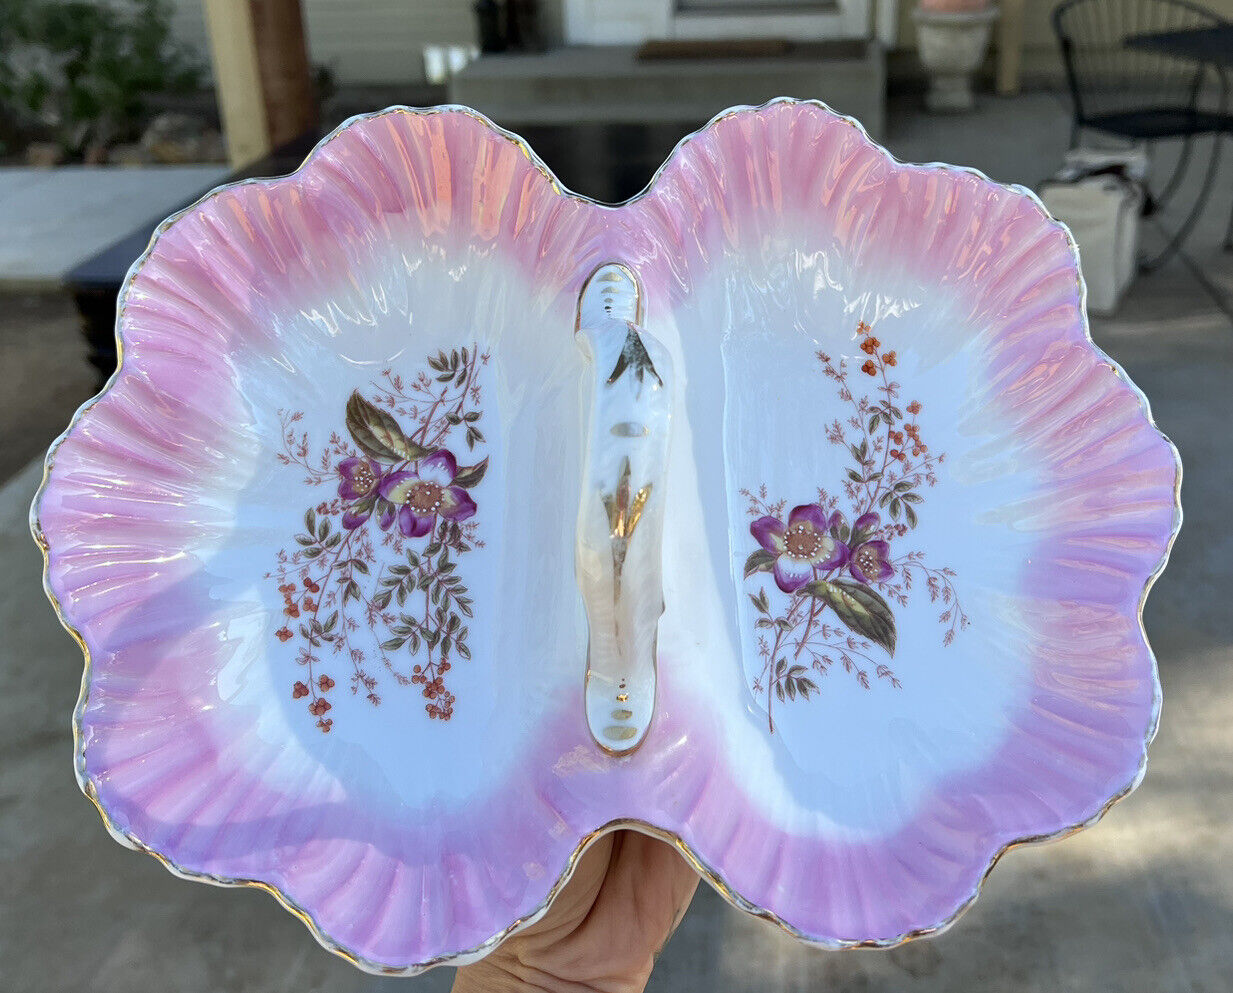 Beautiful Antique KPM Handpainted Pink Floral Gold Candy Dish w Handle 19th C